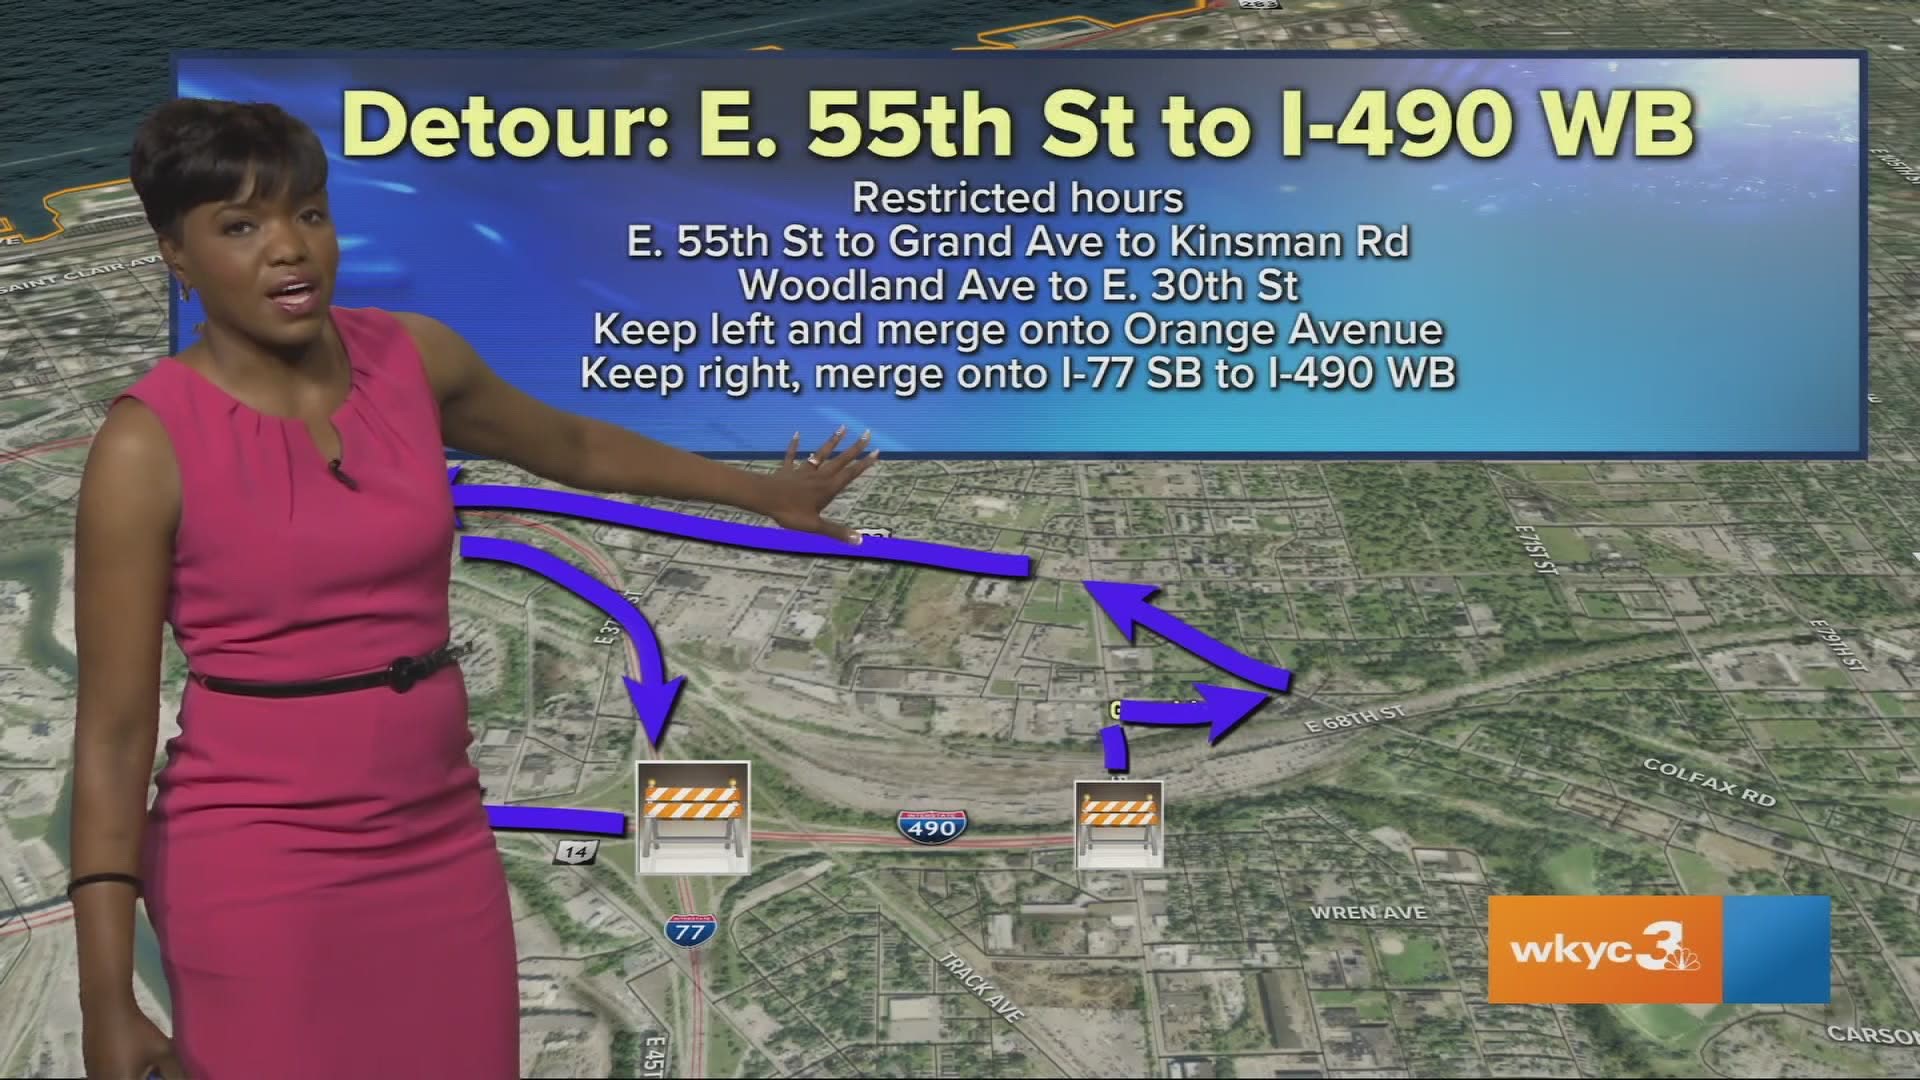 May 1, 2019: Our own traffic expert, Danielle Wiggins, has a detailed explanation of the best detours you can take when I-490 is closed in Cleveland for the next two years.